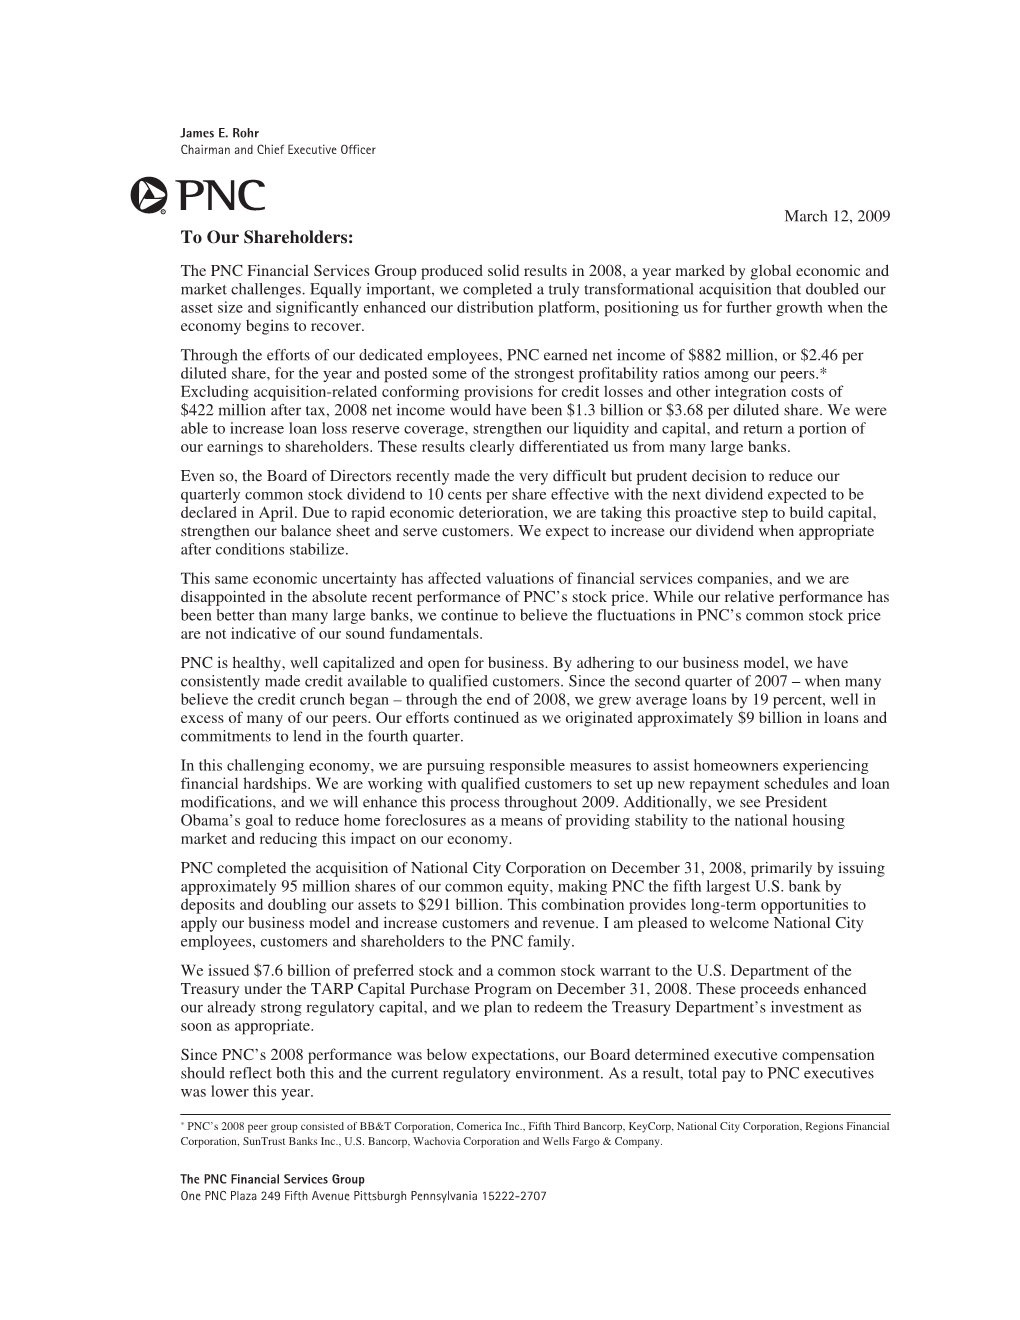 To Our Shareholders: the PNC Financial Services Group Produced Solid Results in 2008, a Year Marked by Global Economic and Market Challenges